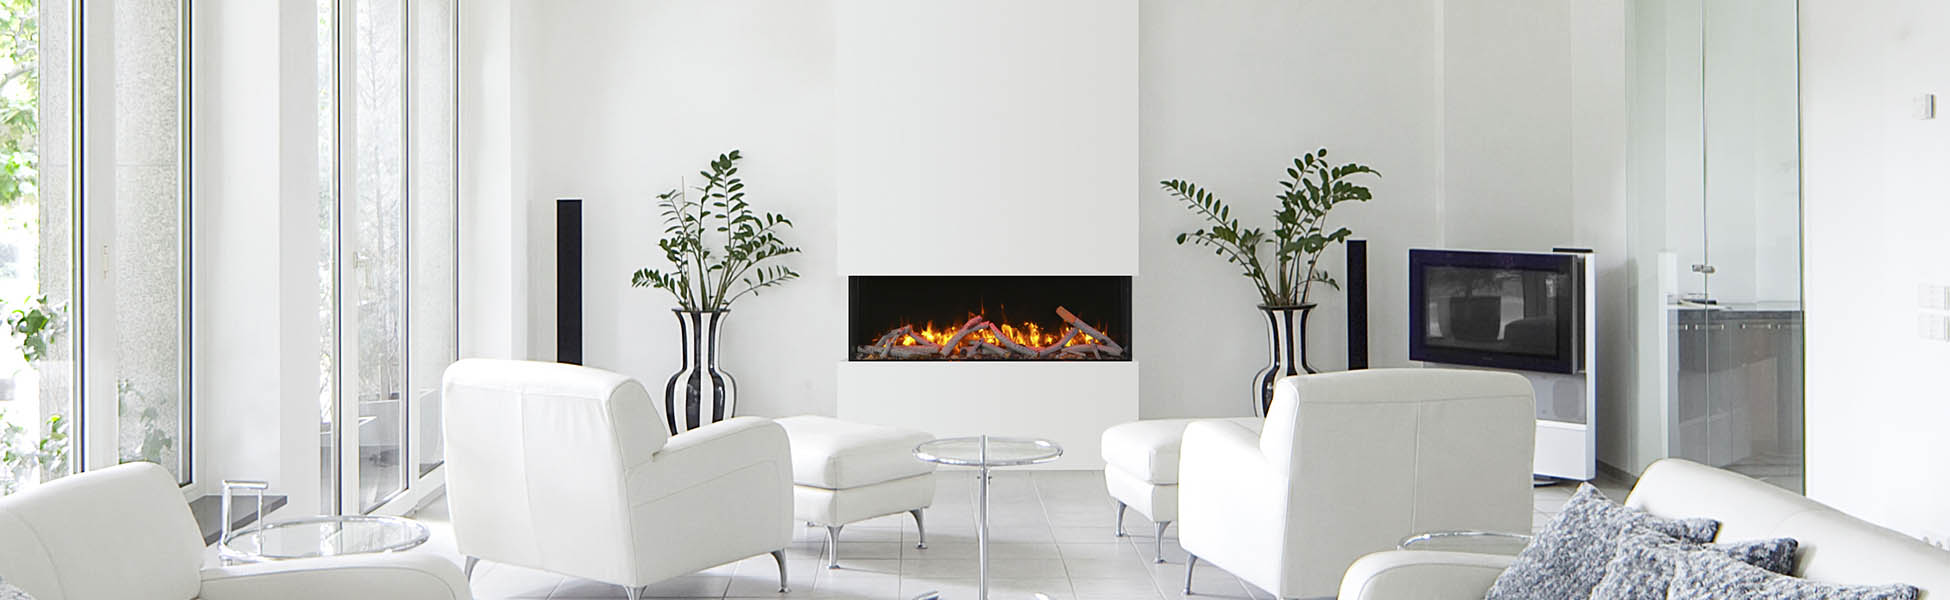 Electric fireplaces